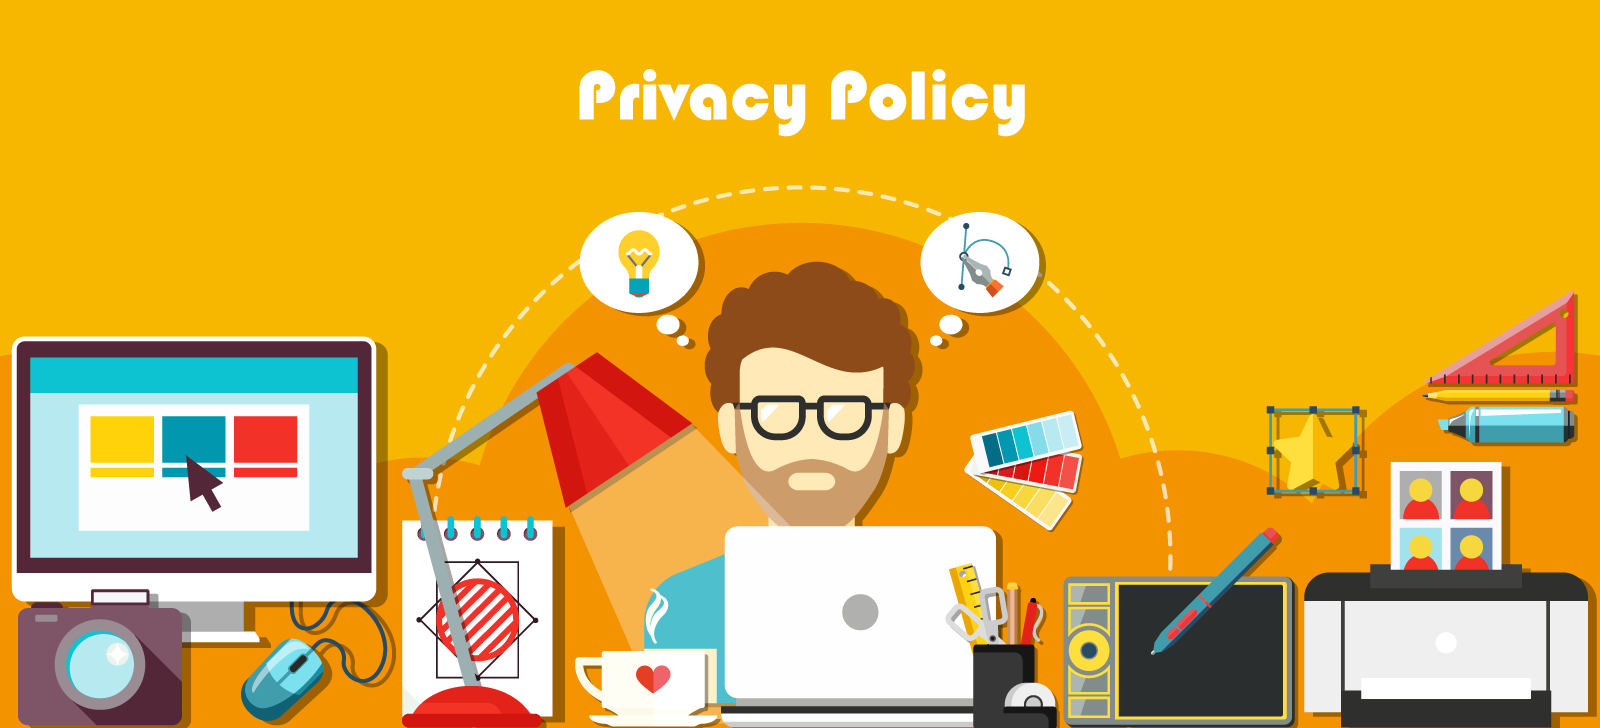 imageprivacypolicy